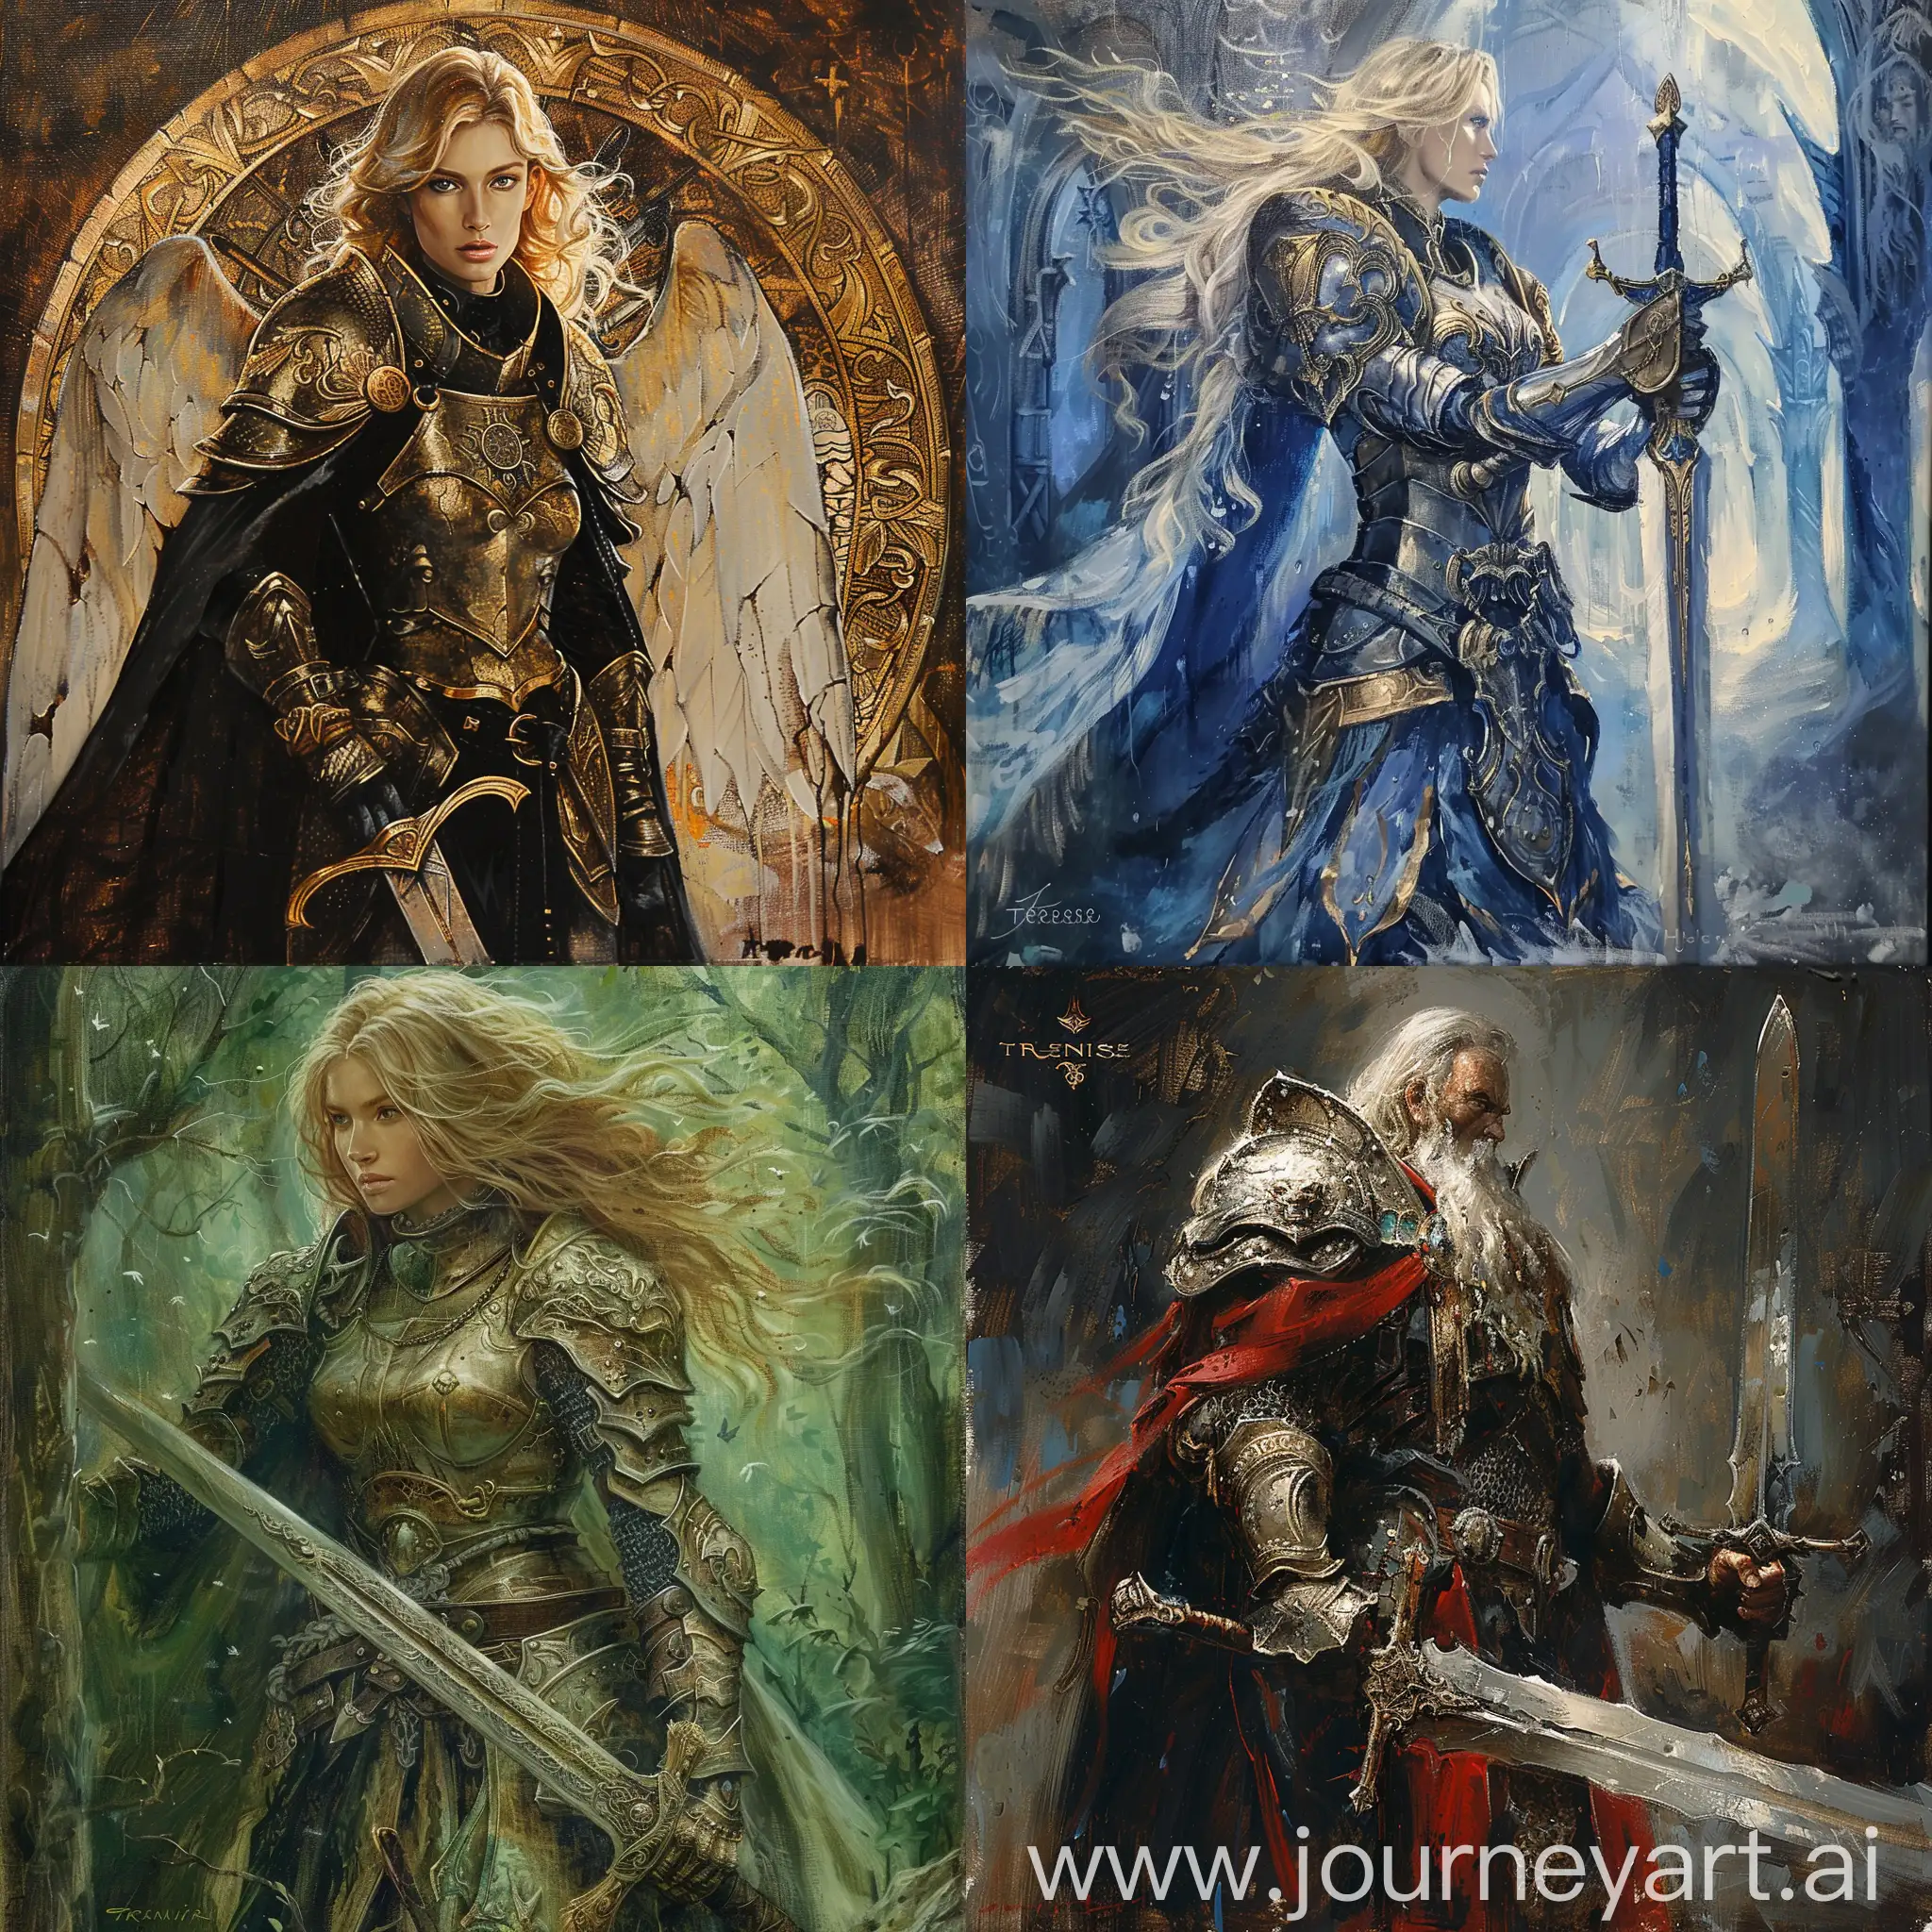 magical blessed warrior
In the art style of Terese Nielsen oil painting.